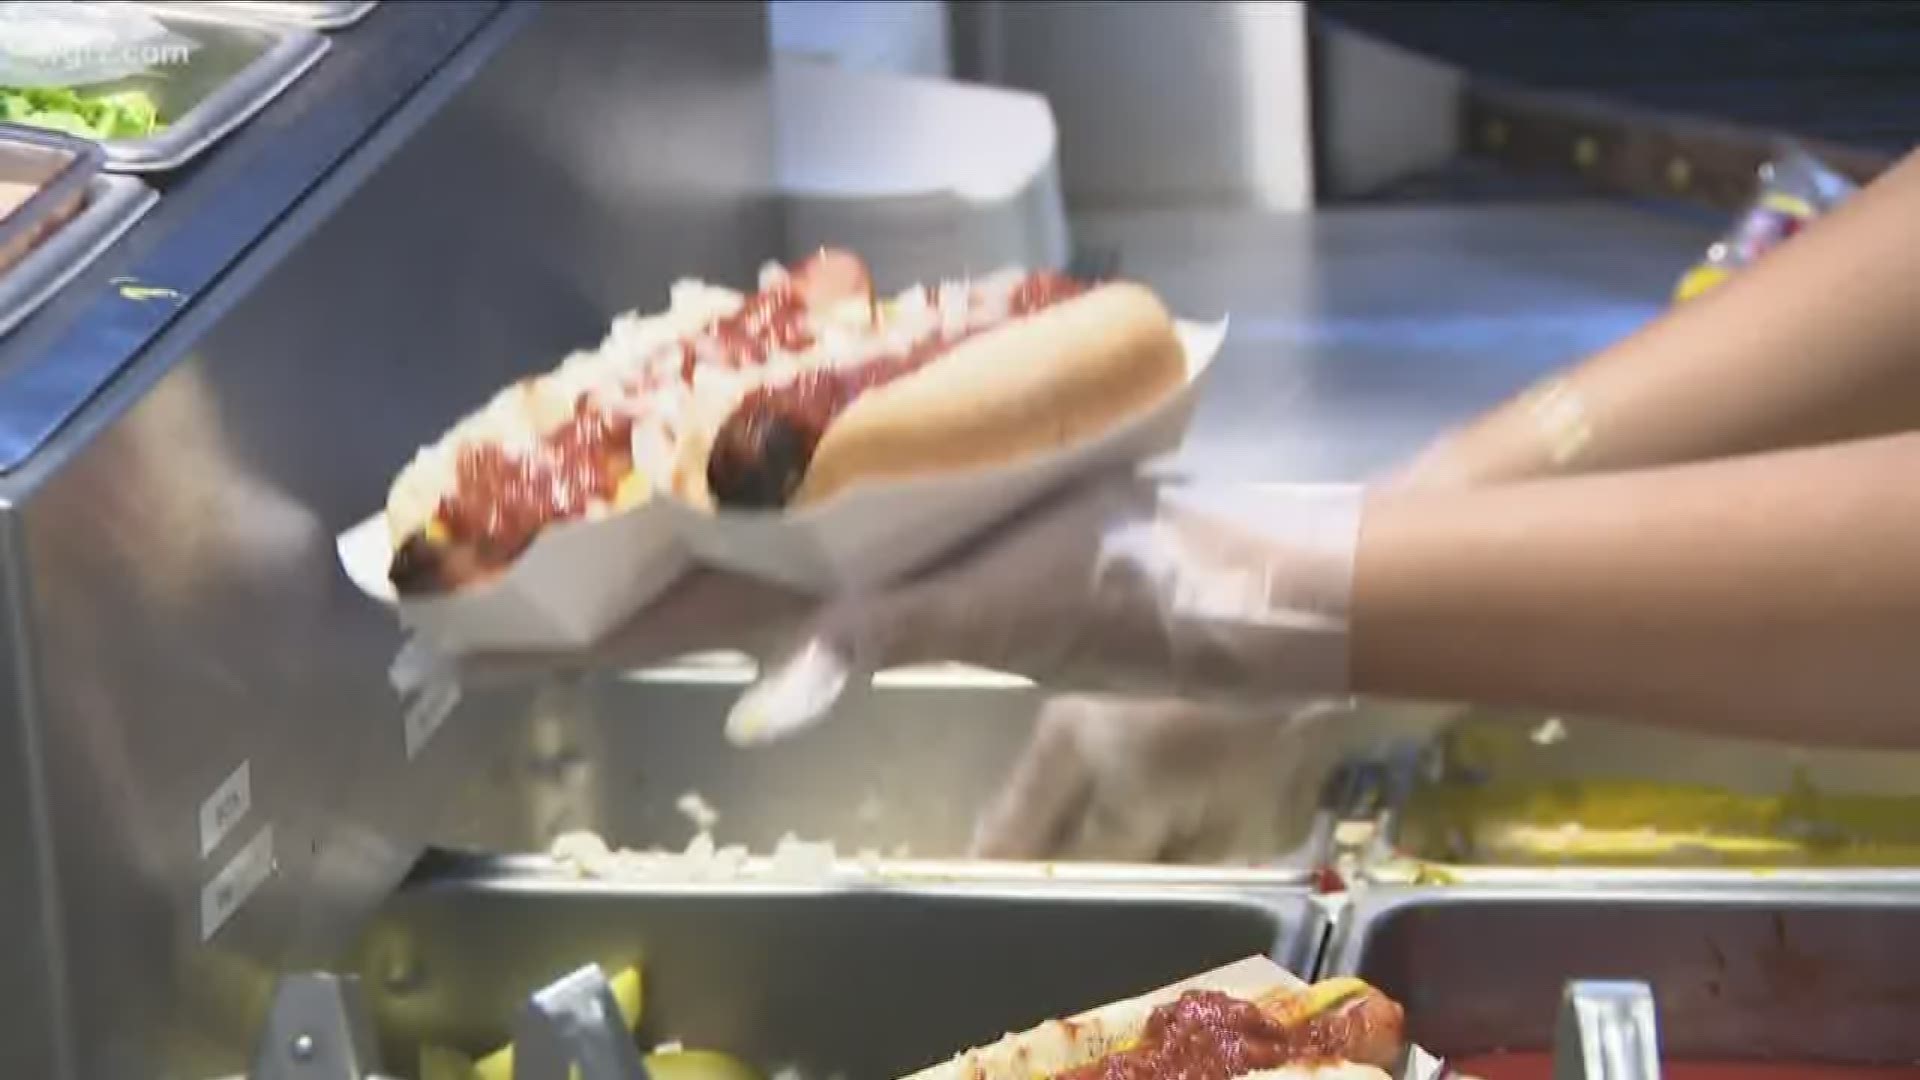 To celebrate its 93rd birthday, the restaurant will serving up 93 cent hot dogs all day without a limit.